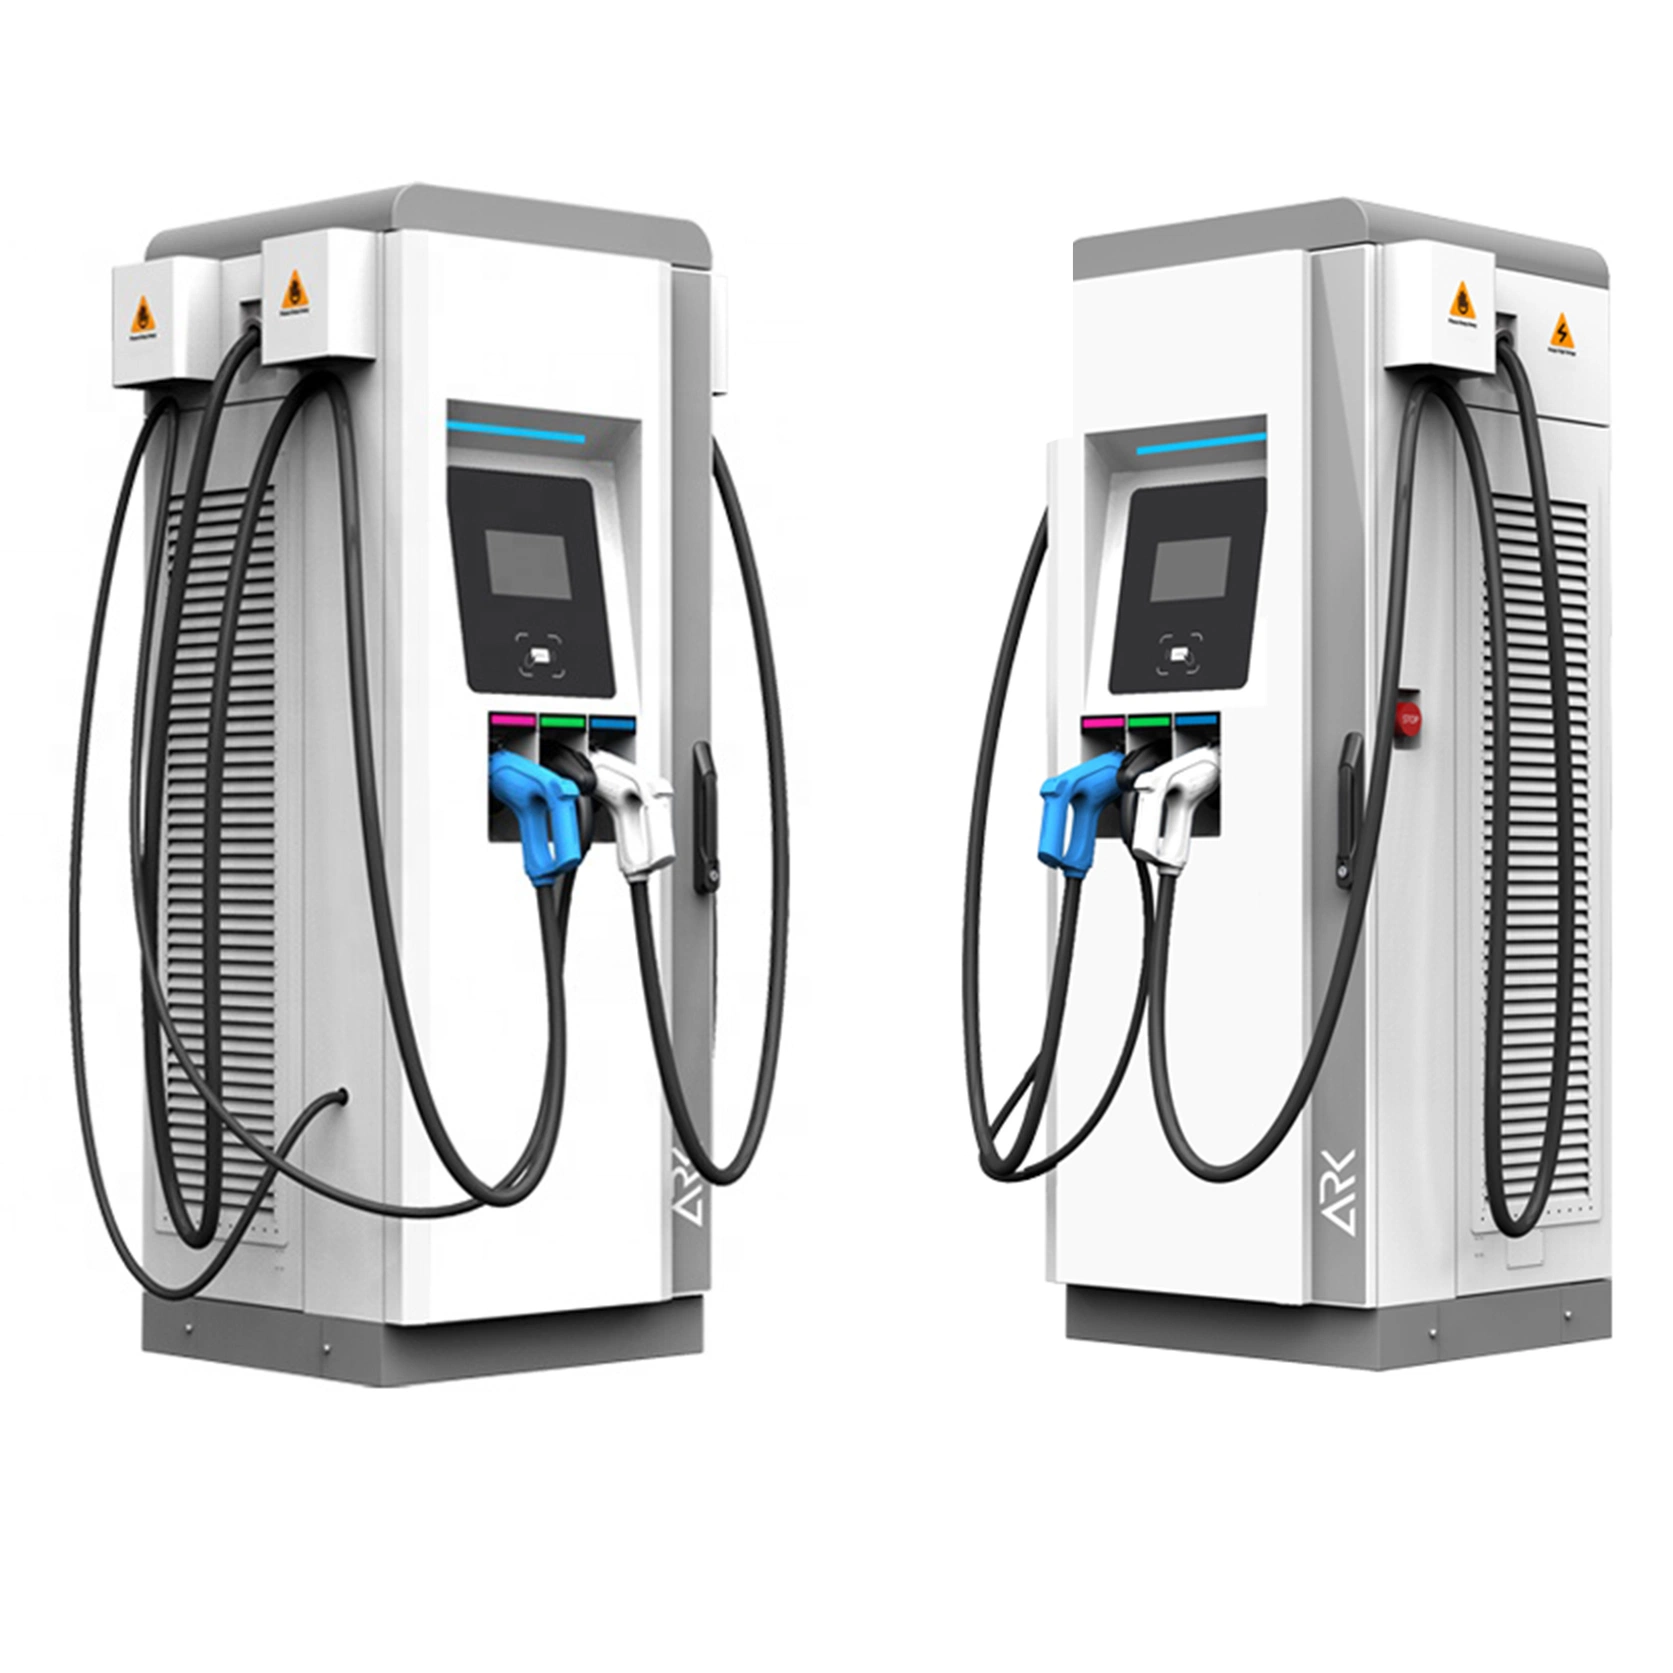 New Product WiFi Chademo Ocpp Level 3 3phase Evse DC Car Charging Station Pile